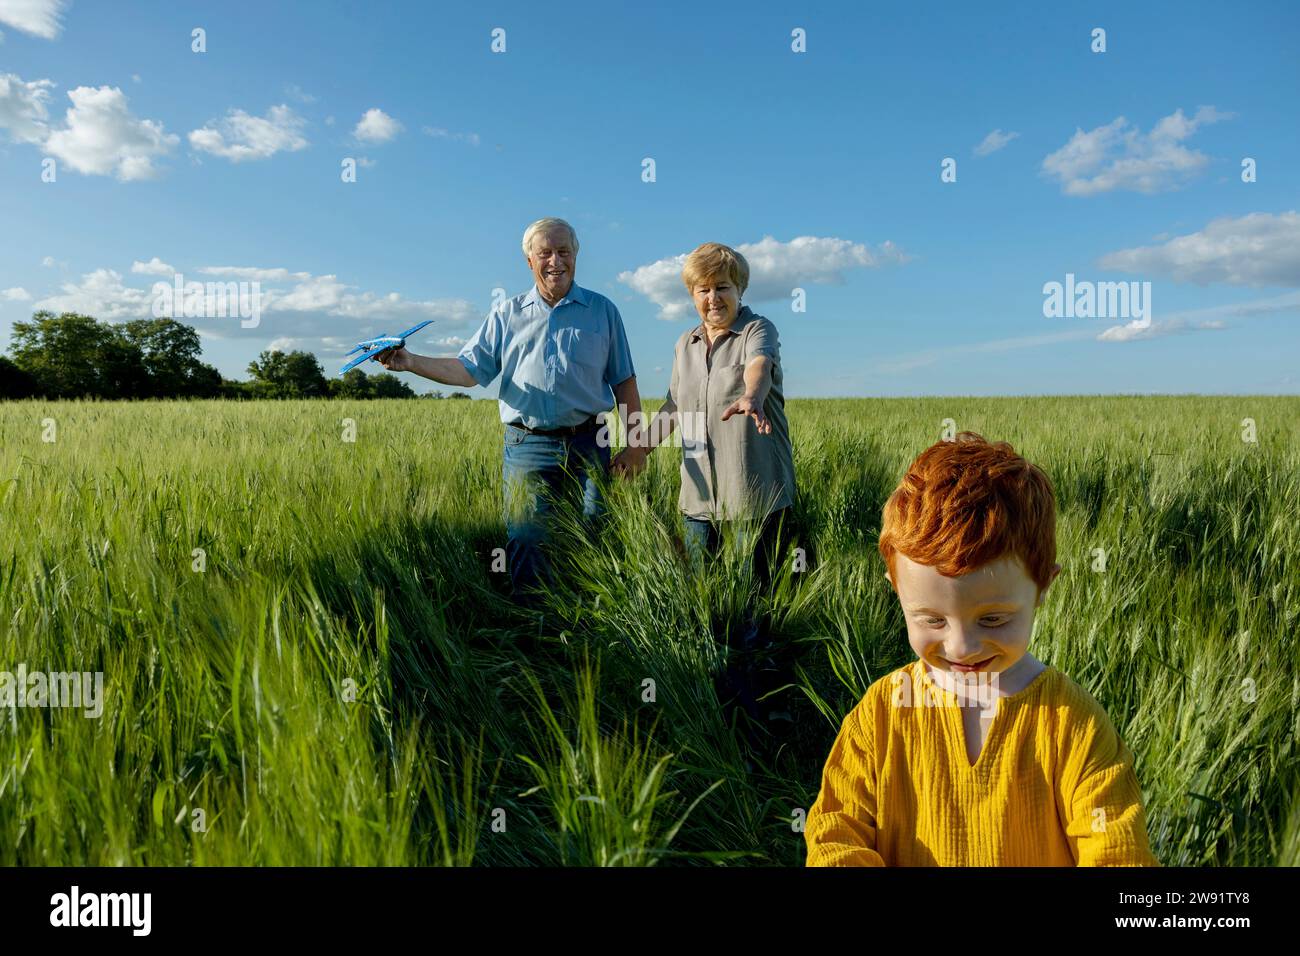 Senior couple spending leisure time with grandson in field Stock Photo